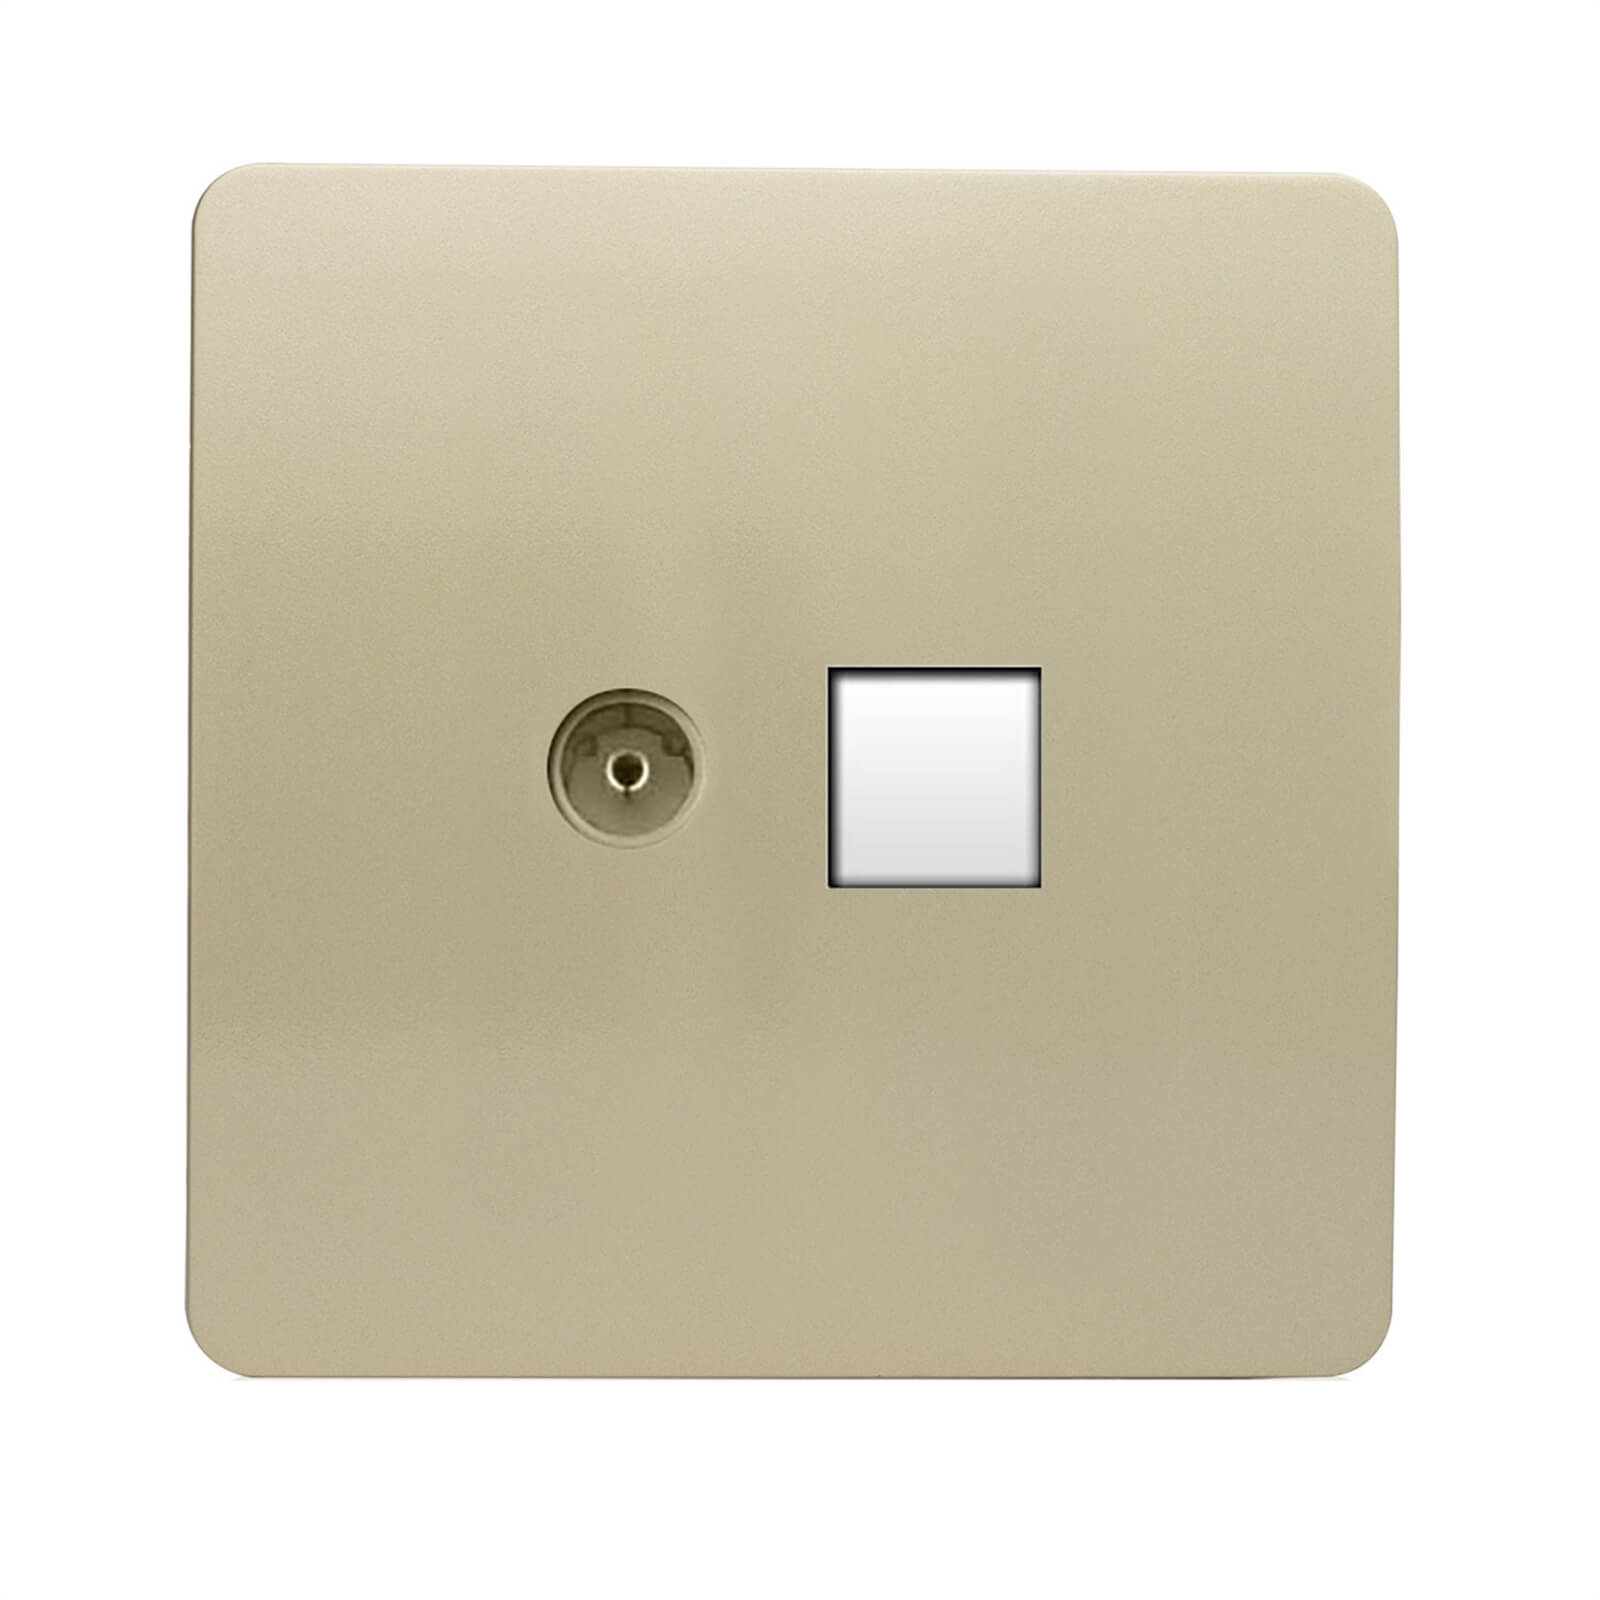 Trendi Switch TV Co-axial and PC Ethernet Sockets  in Screwless Gold